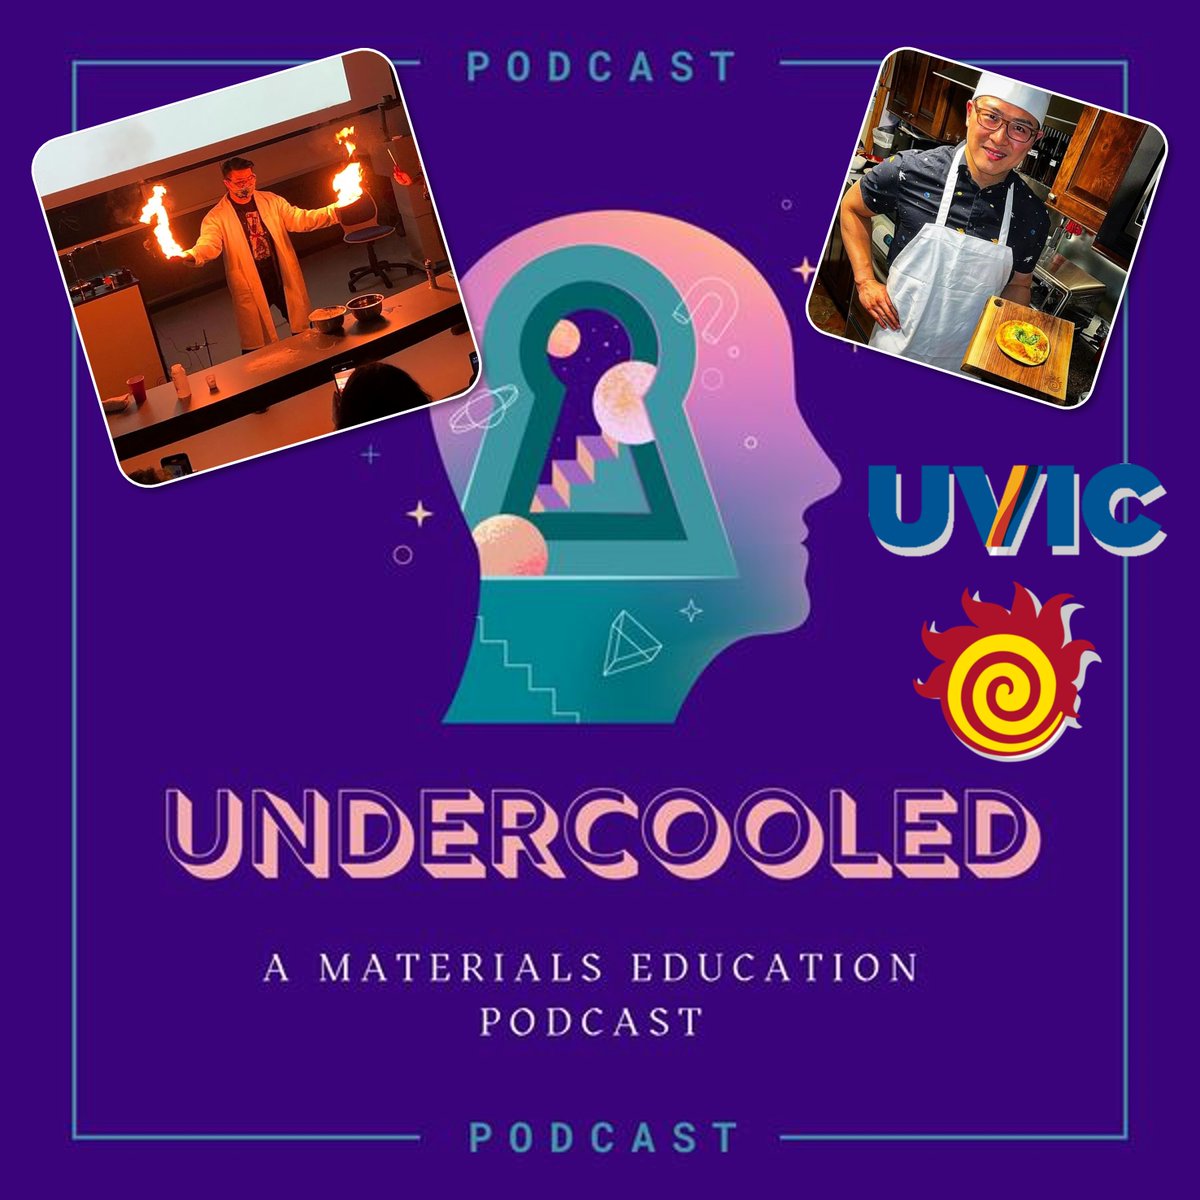 Never thought I'd be on a podcast lol... Over the holiday break, got interviewed by Dr. Chambers and Yalisove @UMich about my teaching on materials engineering @uvic and @McMasterEng. Focus on gamified learning and social media engagement Link: buzzsprout.com/2268624/142233…